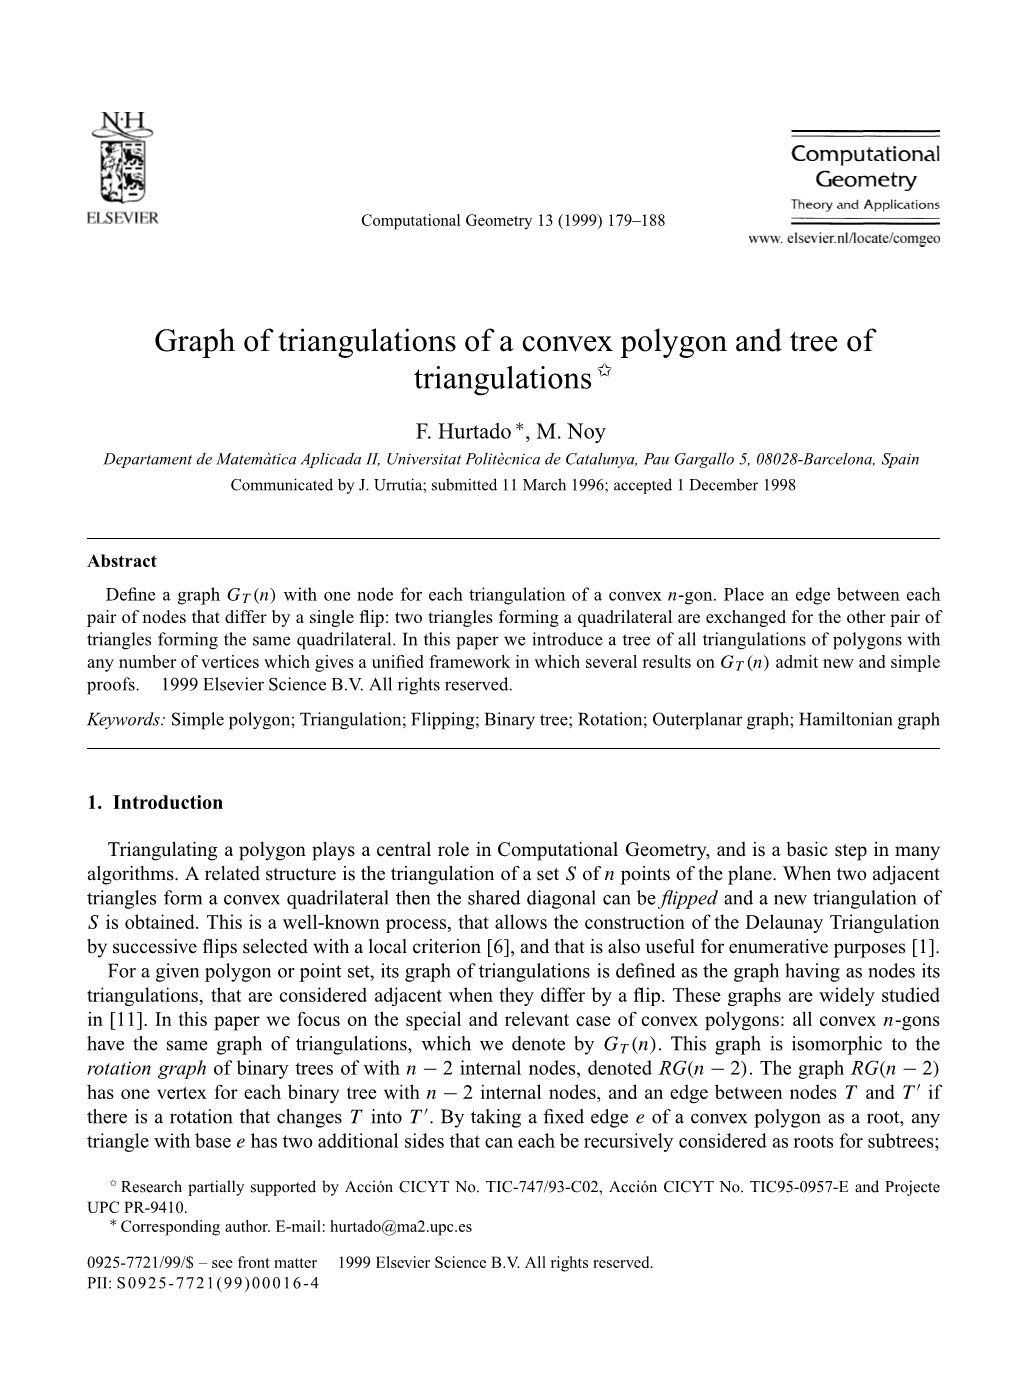 Graph of Triangulations of a Convex Polygon and Tree of Triangulations ✩